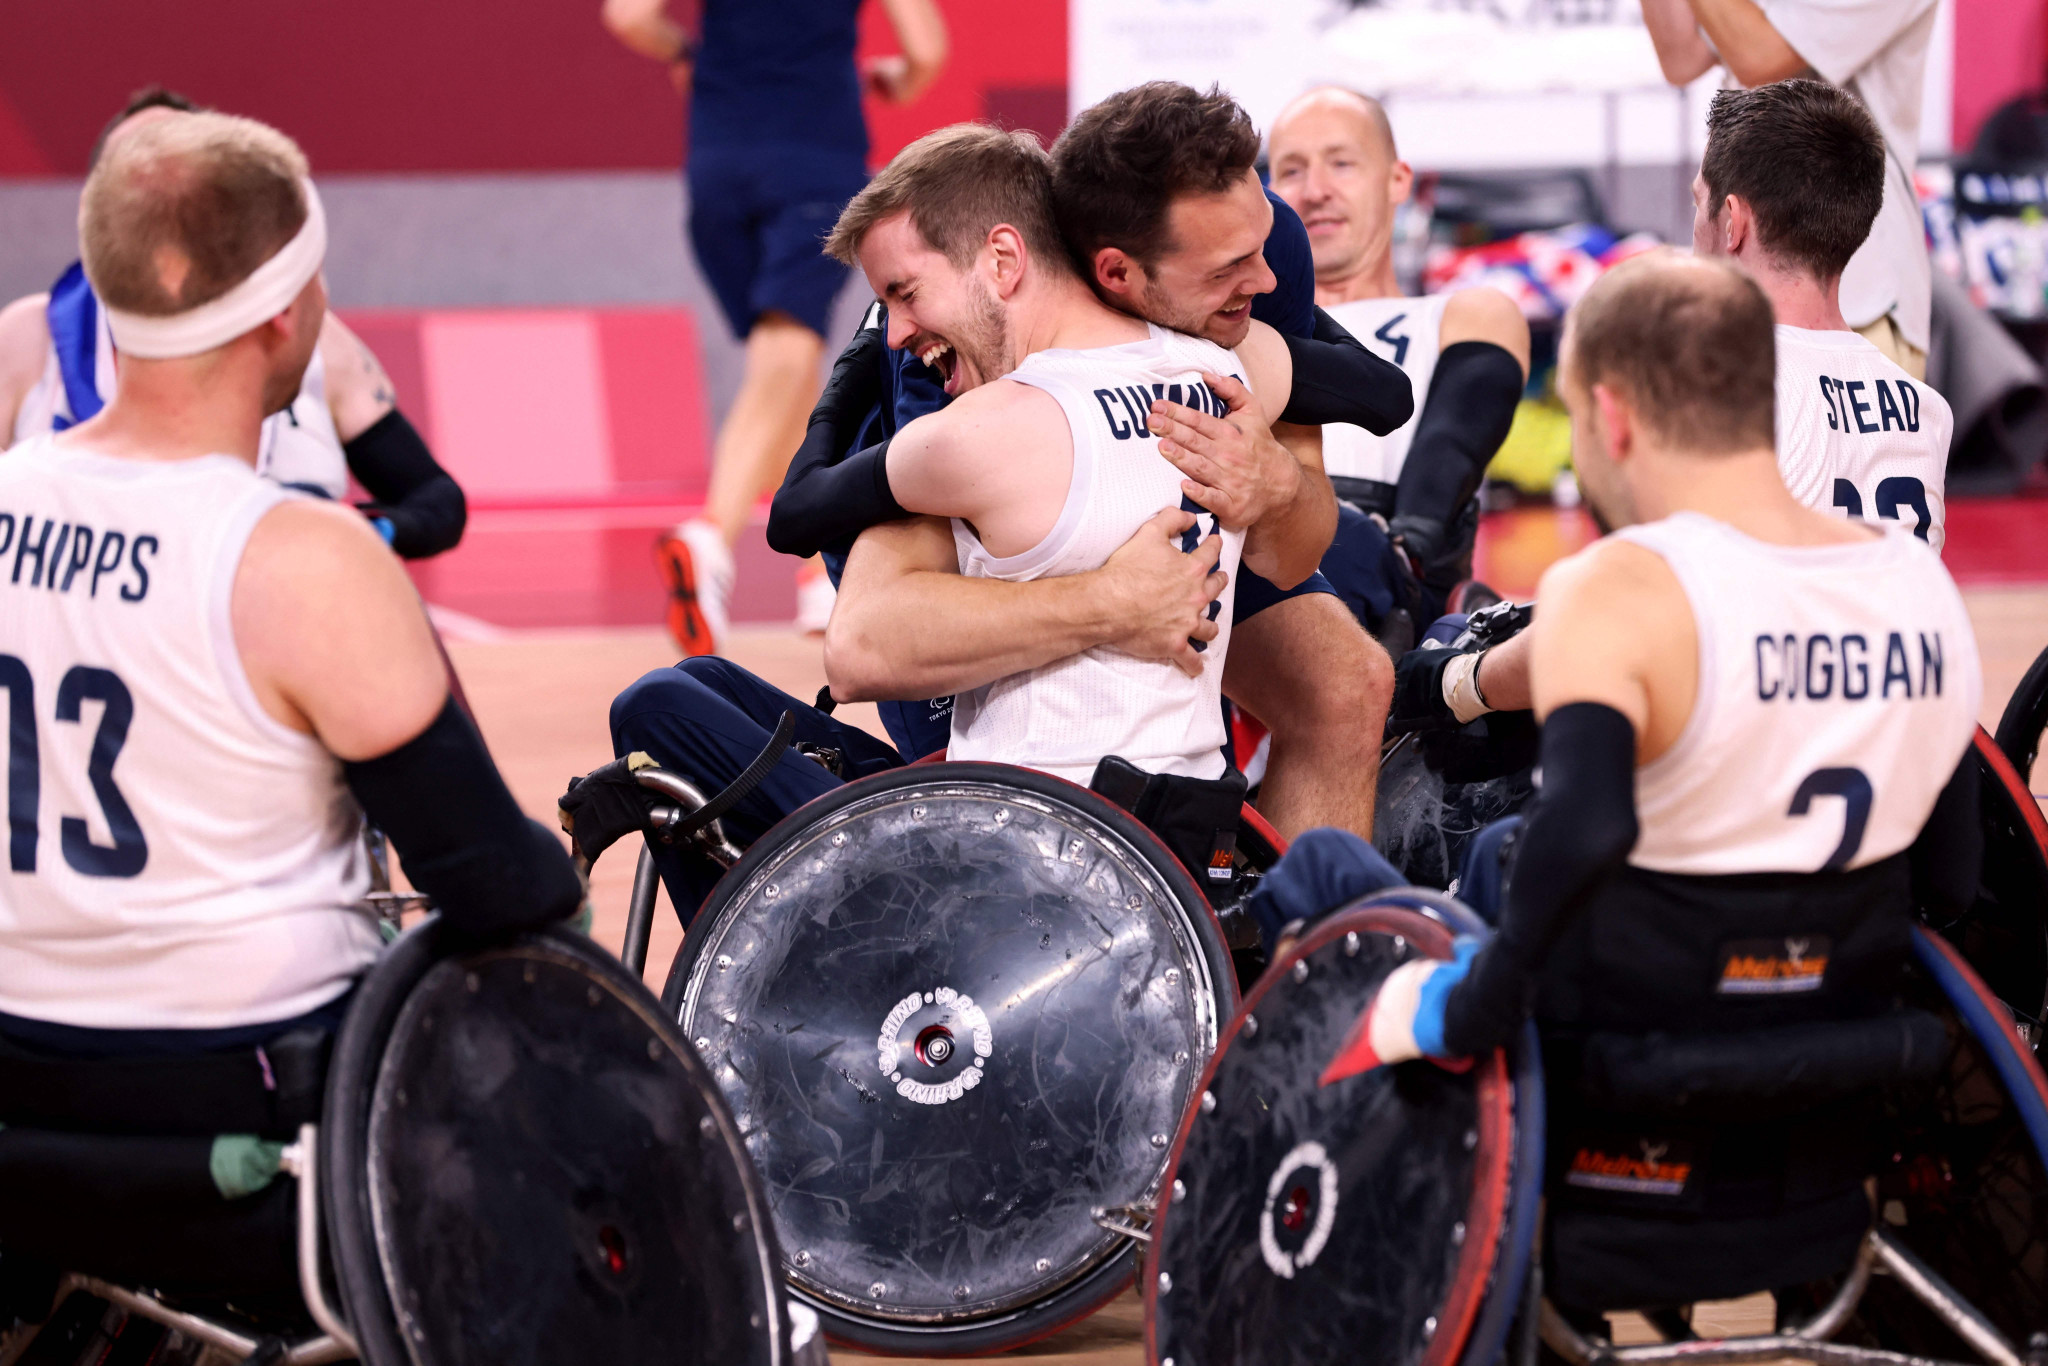 Tokyo 2020 Paralympic champions Britain are seeking their fourth successive European title in Paris ©Getty Images